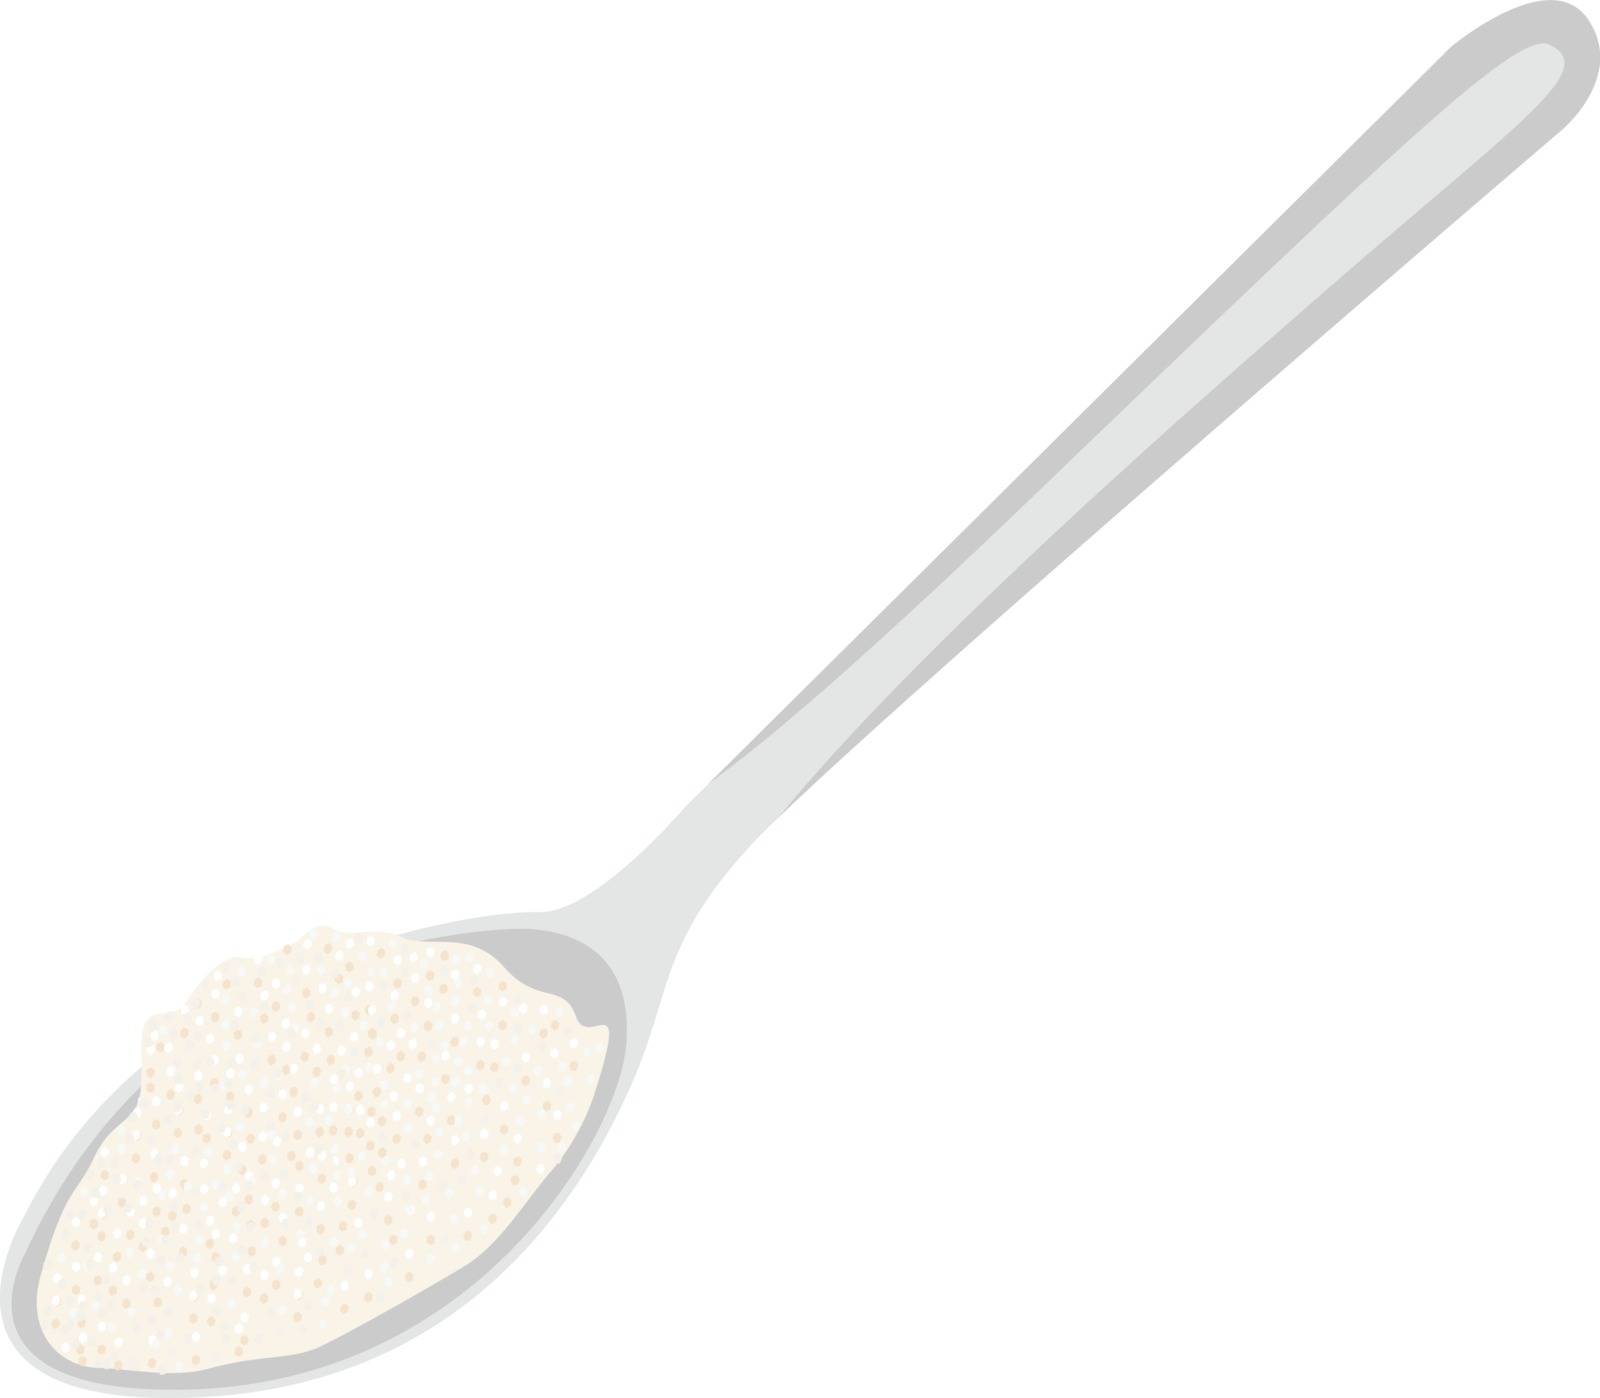 Spoon with sugar vector illustration on a white background isolated